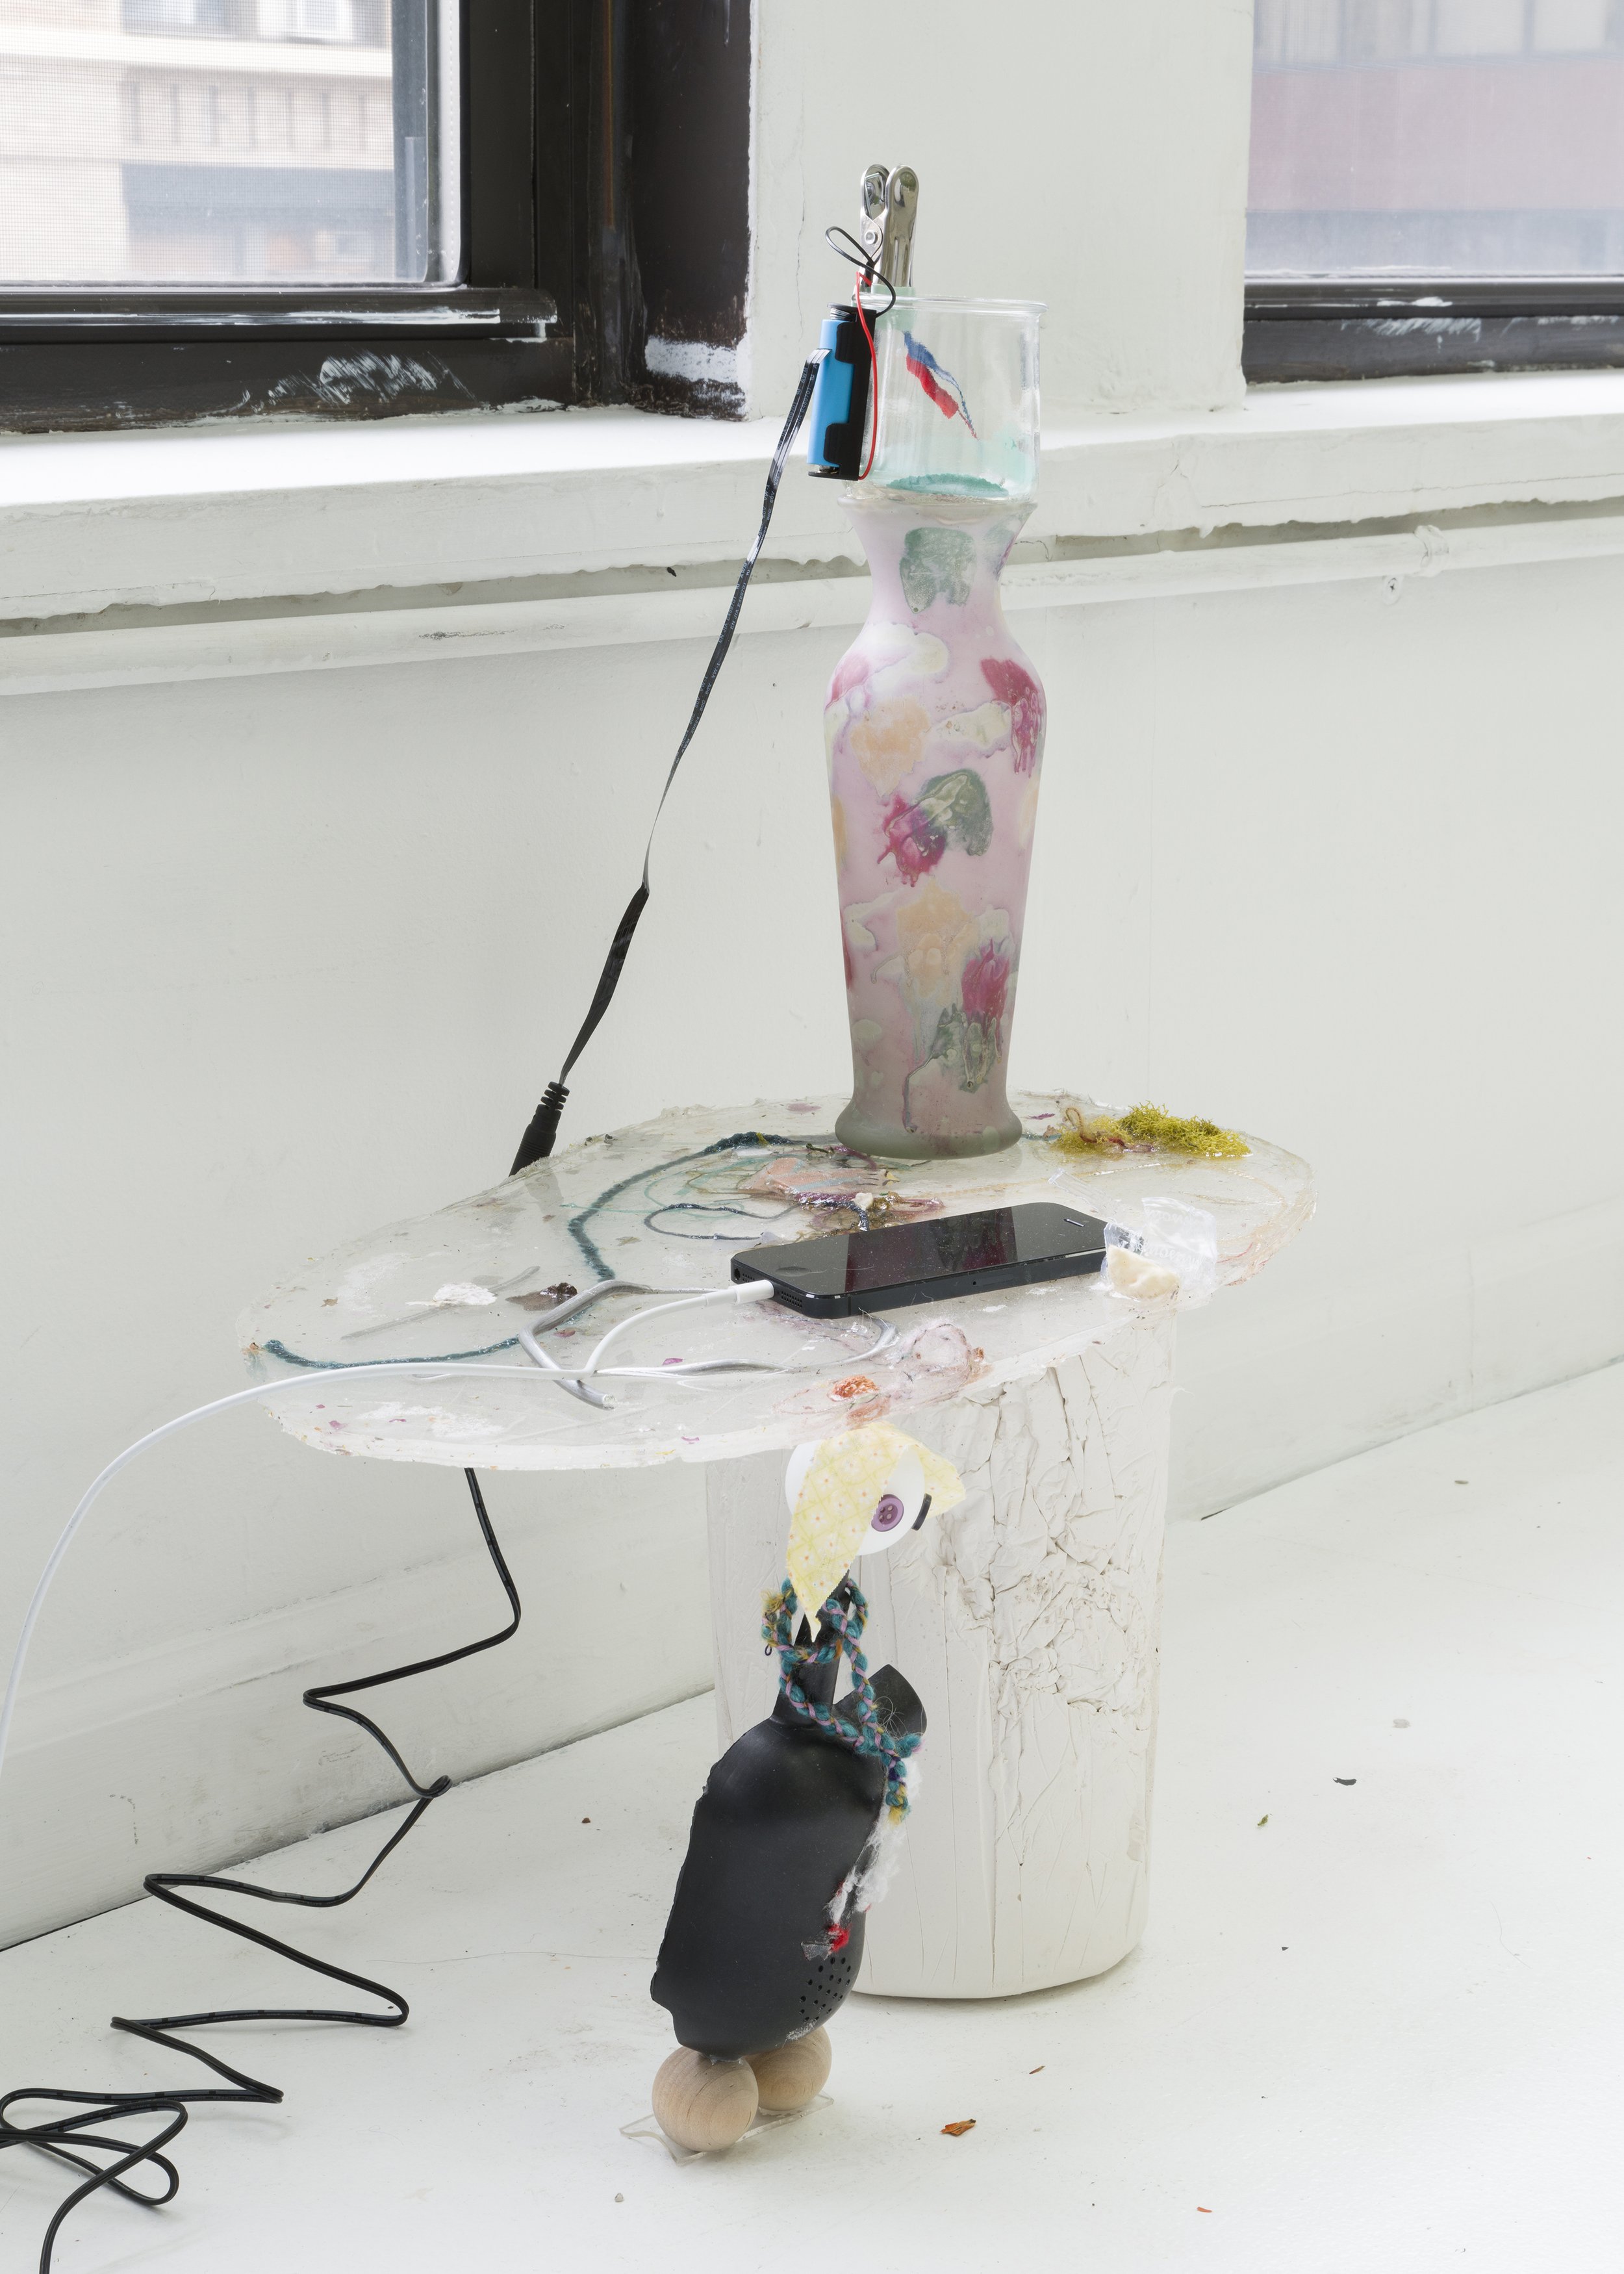   Cricket Tower,  2022. Resin, studio debris, found objects, yarn, plaster, clip, vibrating motor, mica pigment. 22 x 18 x 10 inches. 